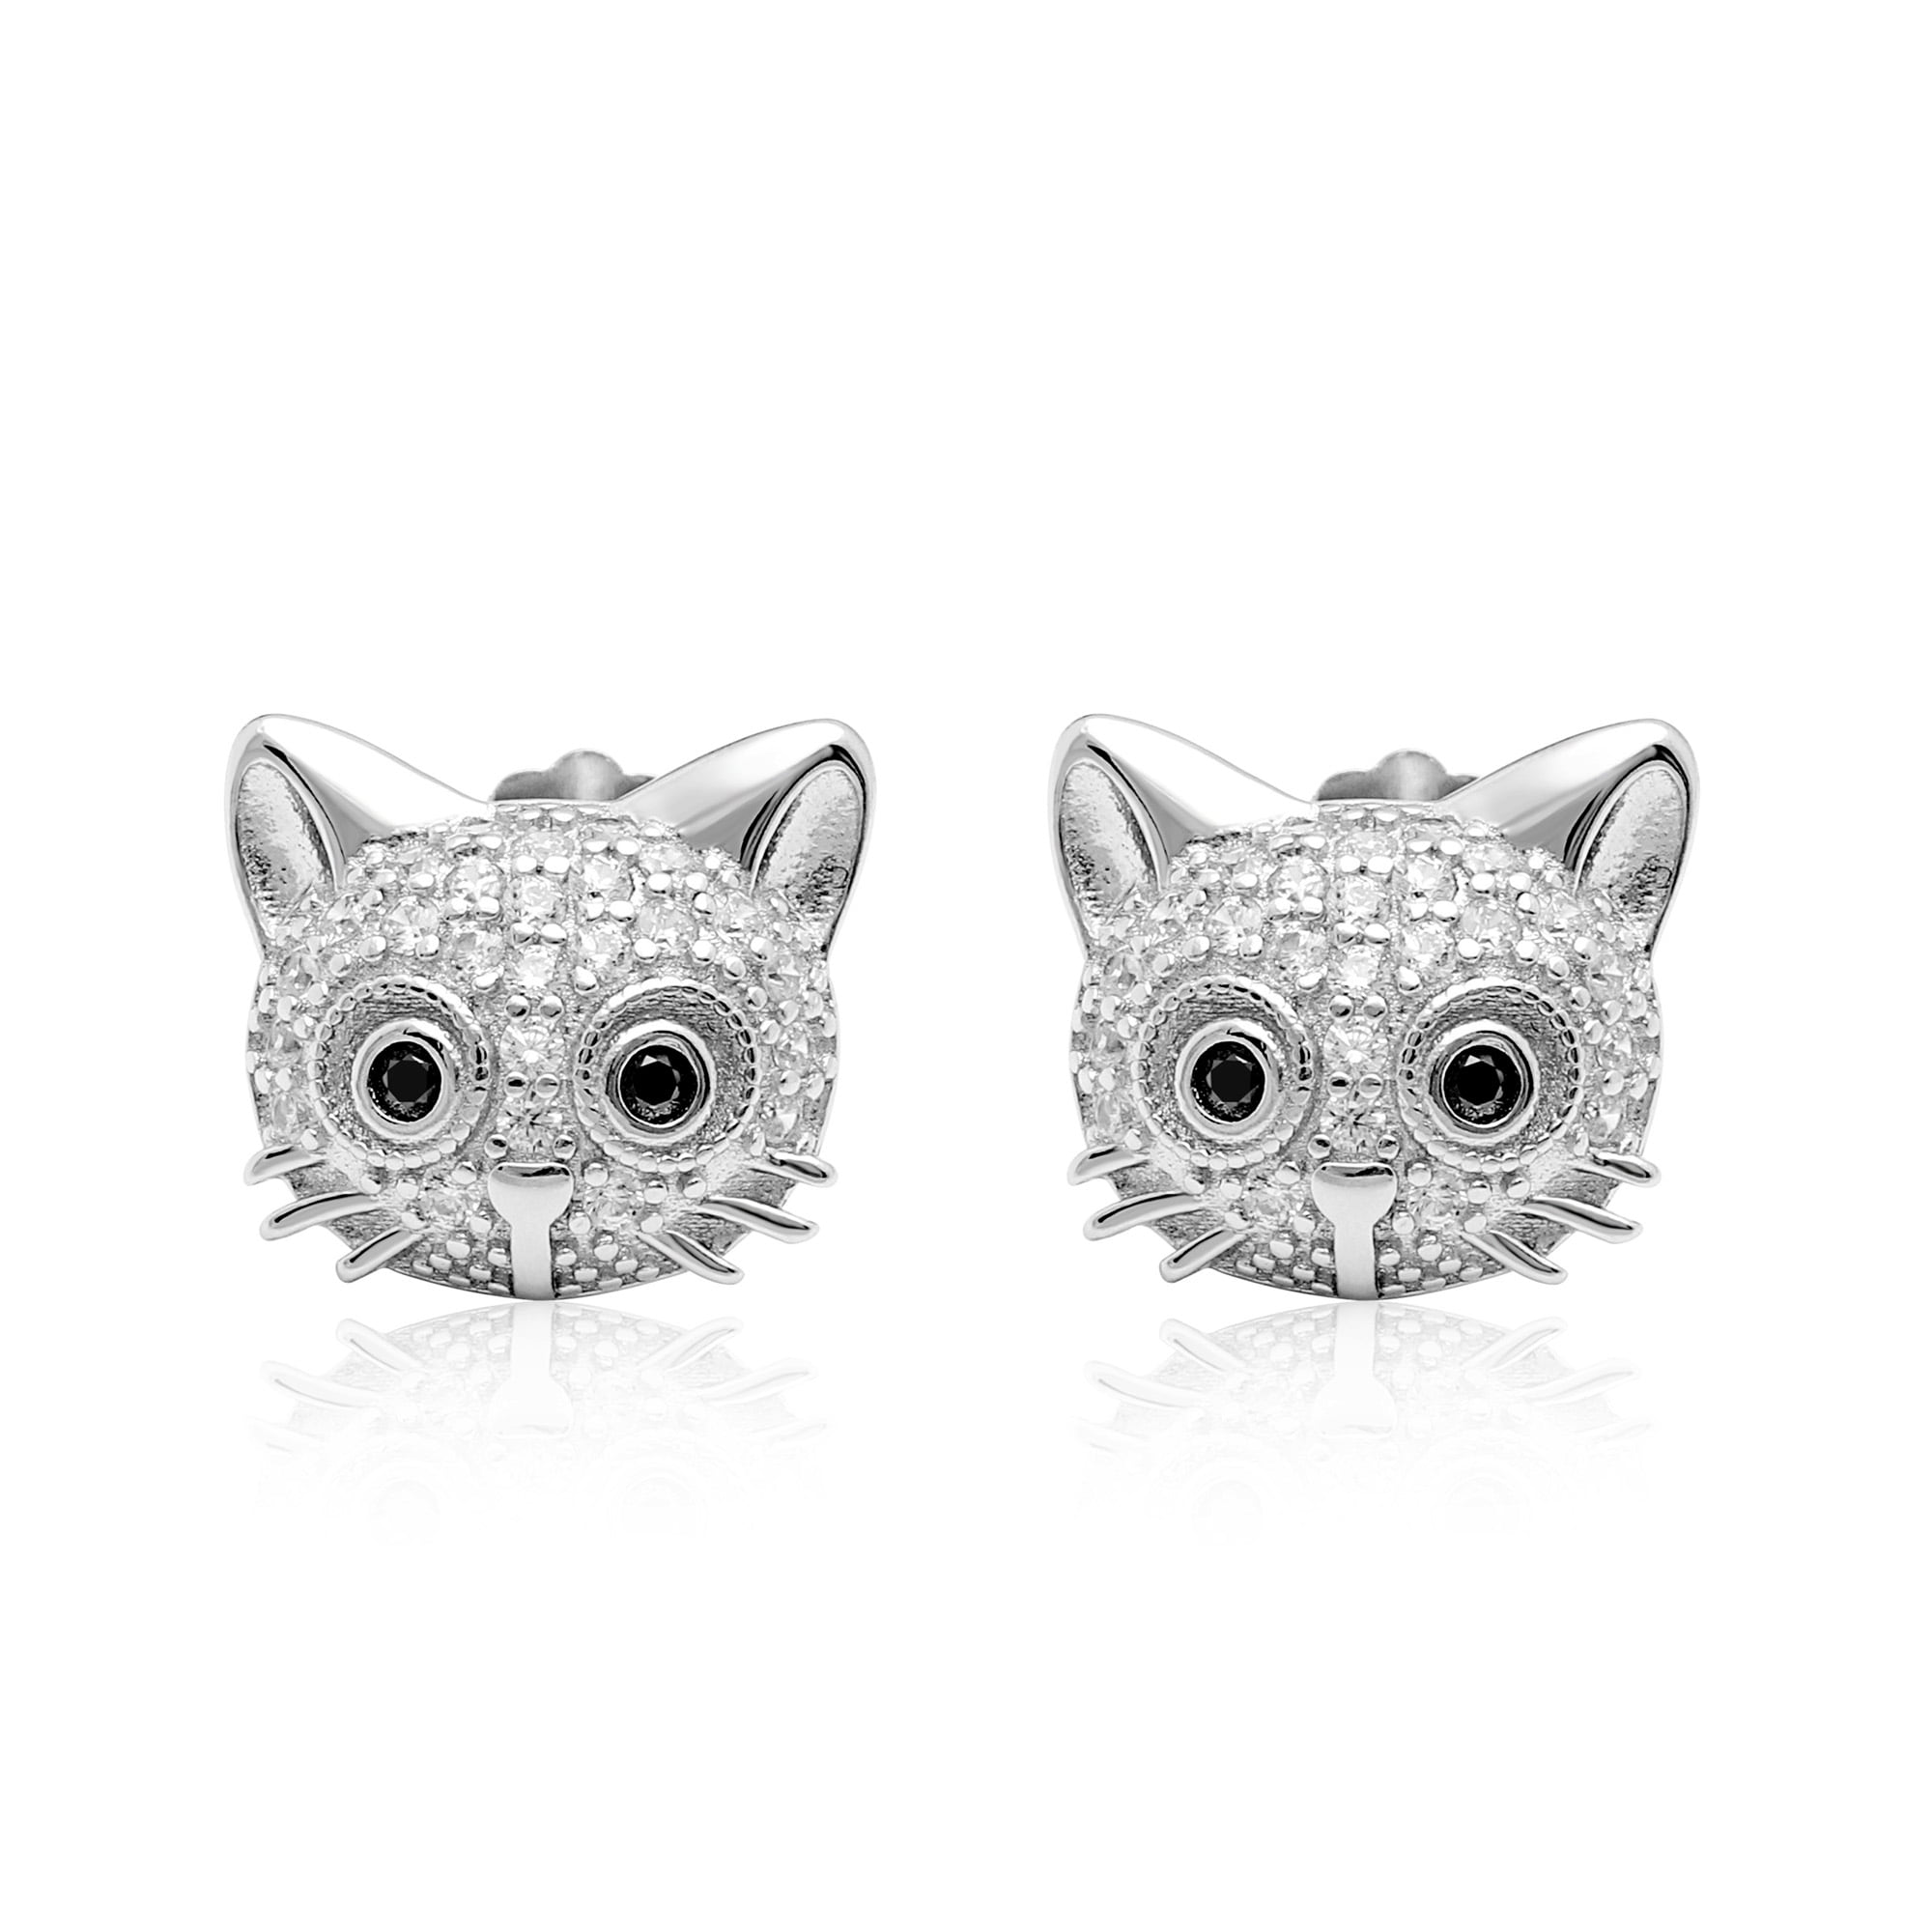 Details about   Kitty CAT KITTEN and Mouse EARRINGS JEWELRY Retro Art Deco style Feline 